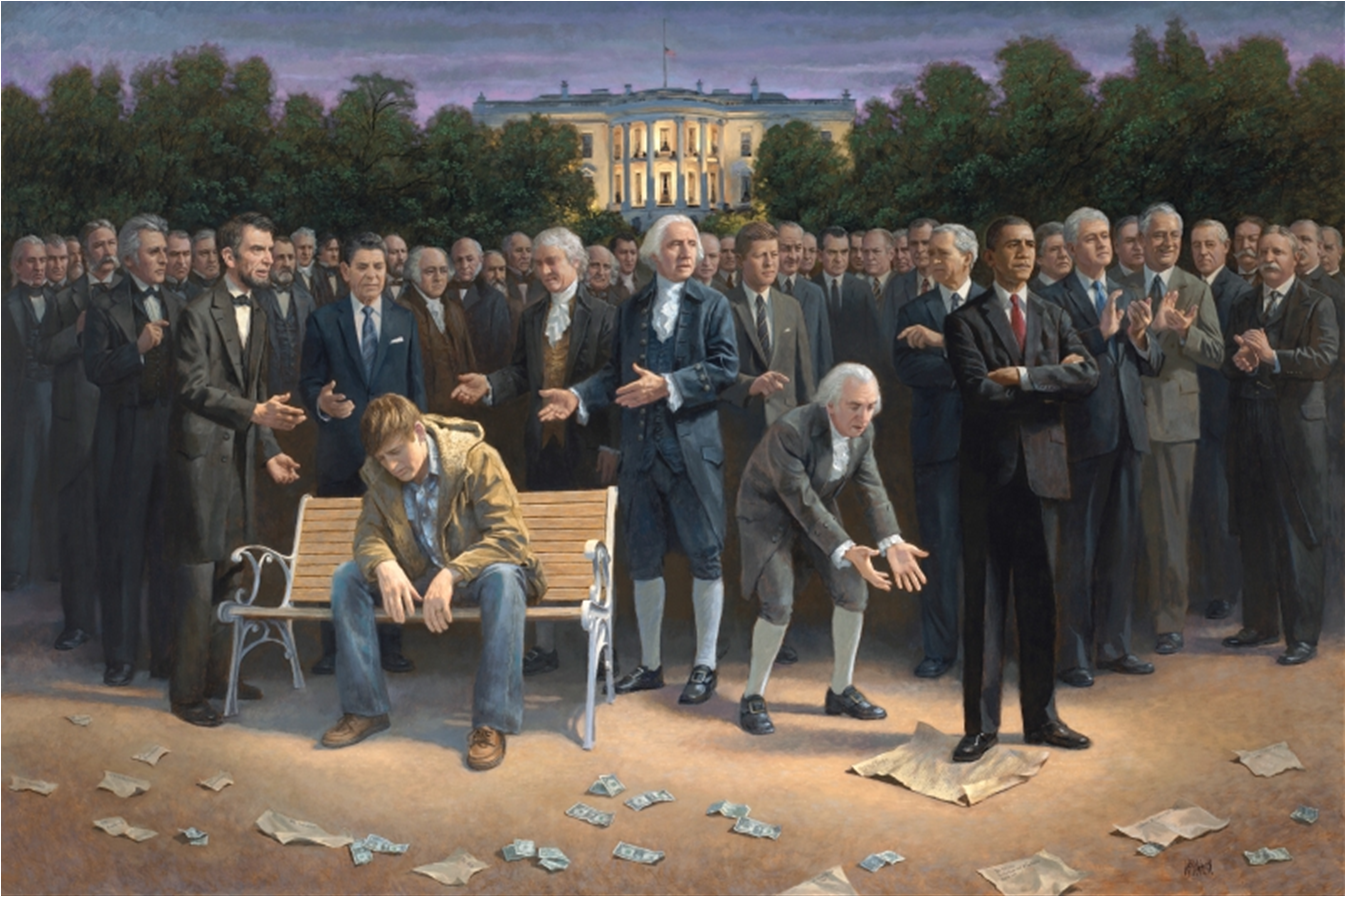 1285422345_1405_FT128872_the_forgotten_man_by_jon_mcnaughton.png